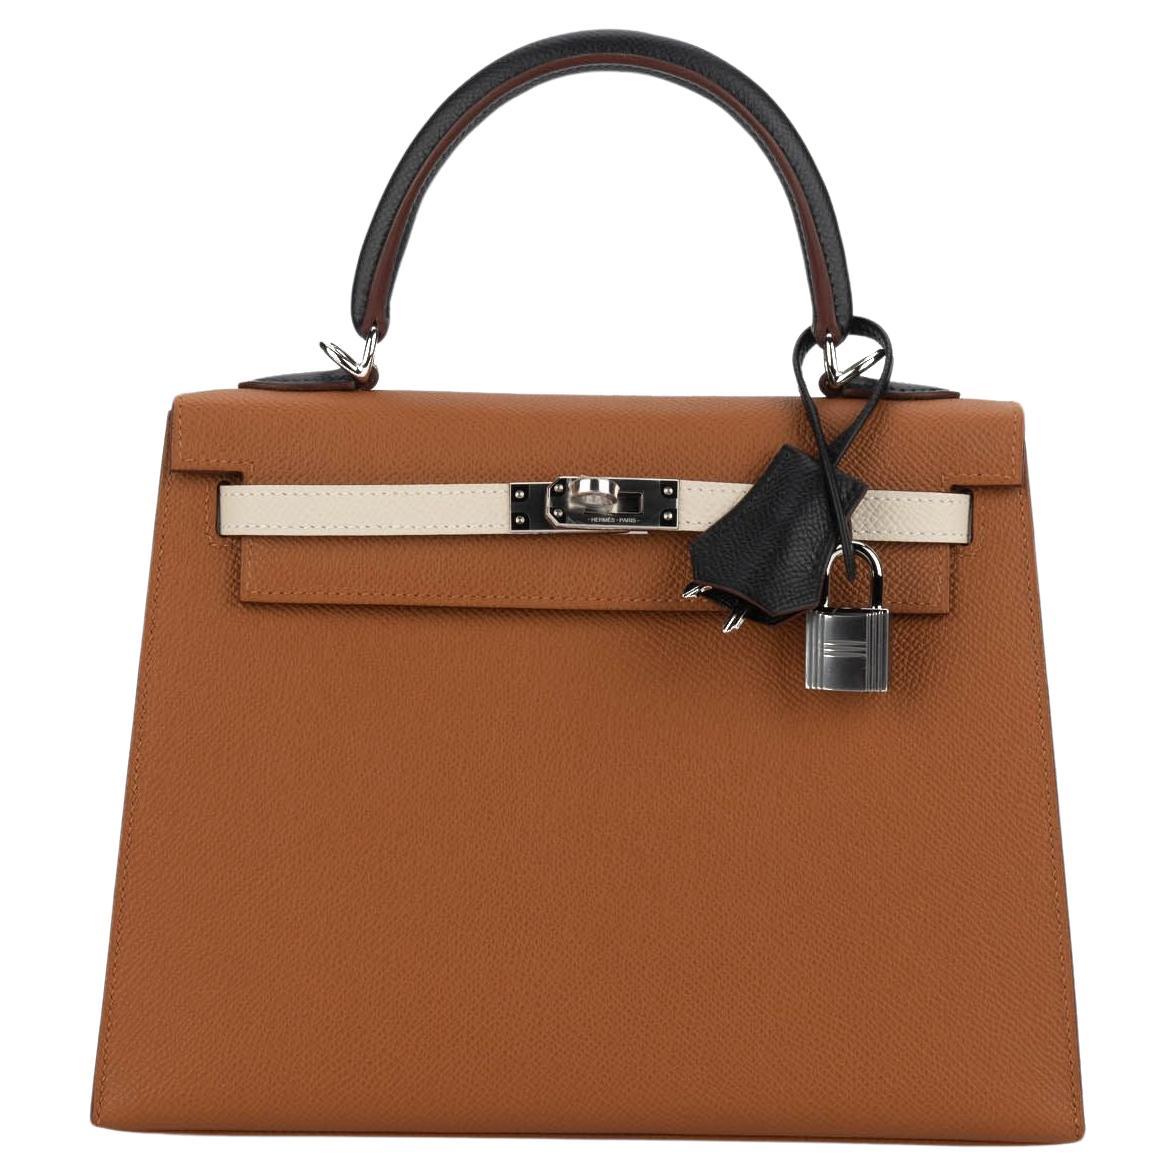 Hermès brand new kelly 25 sellier in epsom leather. Gold, craie,black, blue sapphire and palladium hardware. Handle drop 3